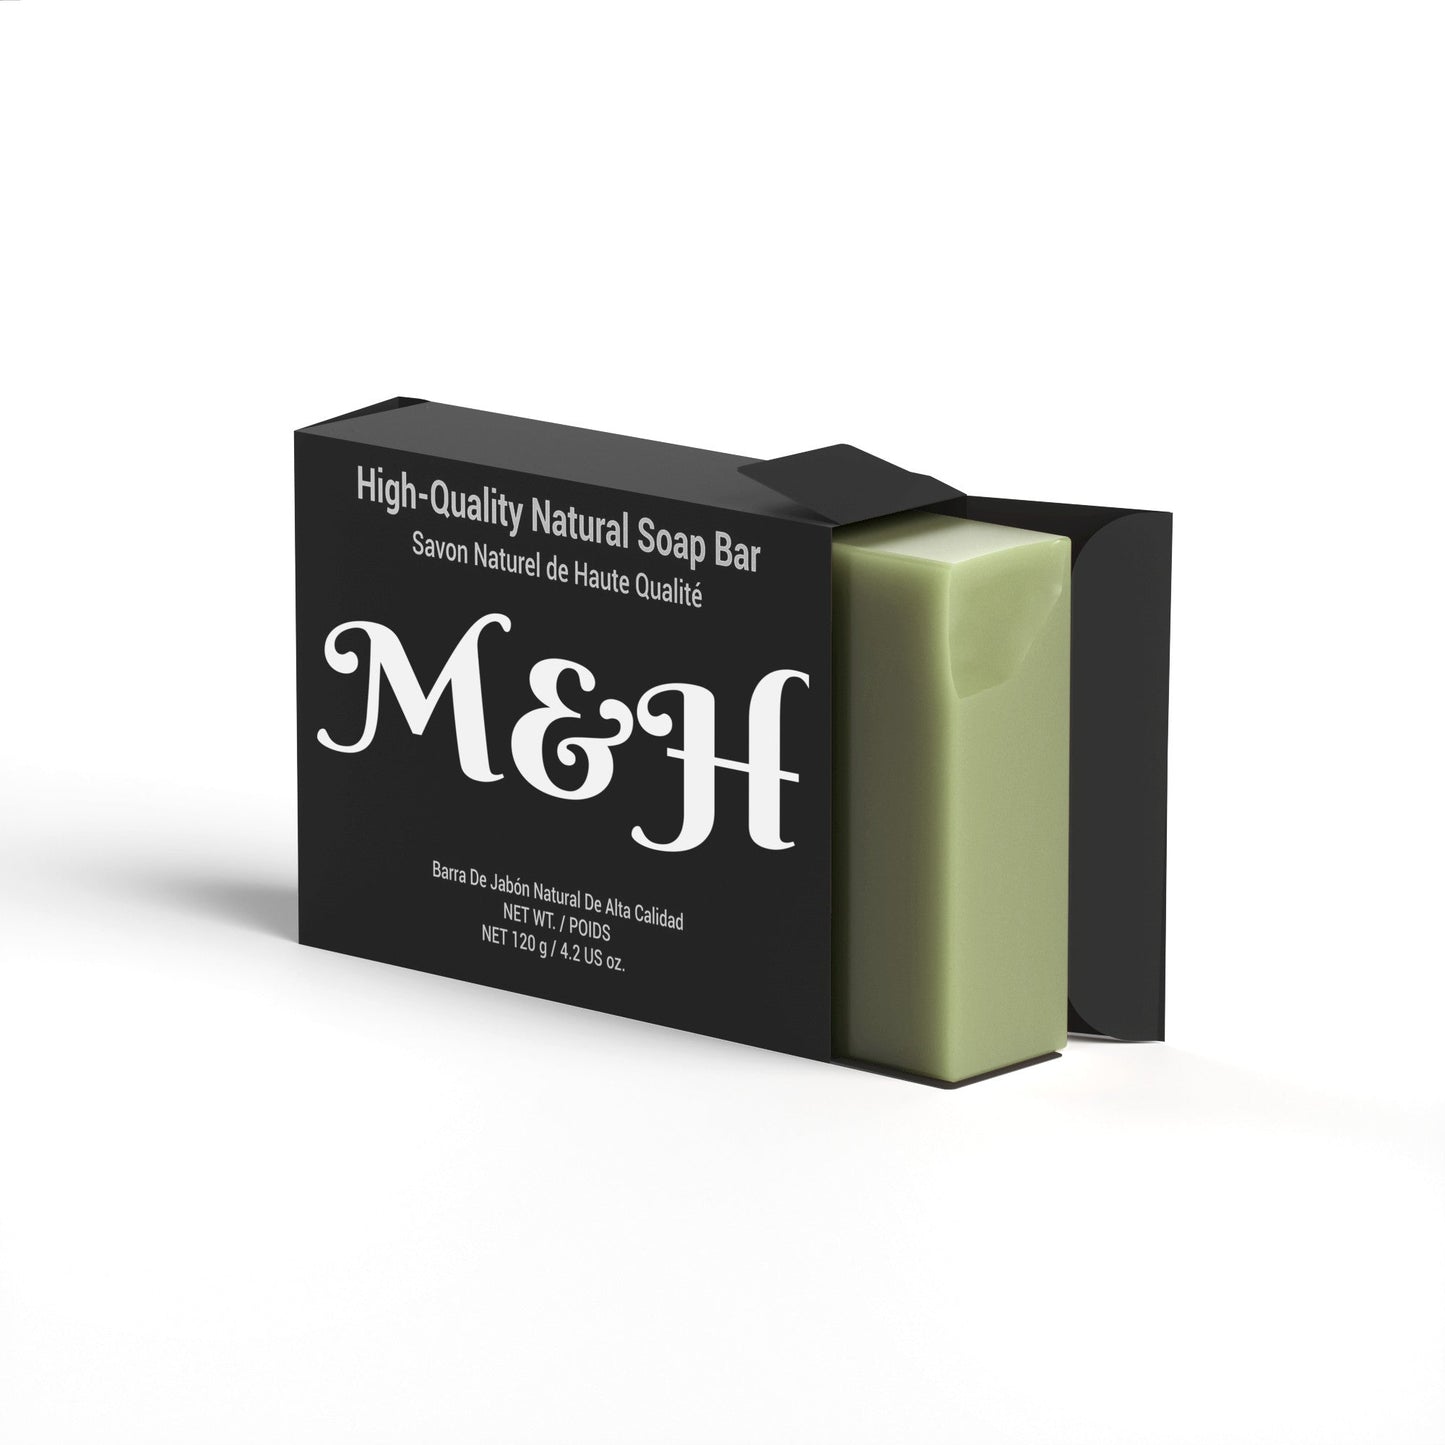 Basil Soap Bars - M&H FashionBasil Soap Barssoap-basilM&H FashionM&H Fashionsoap-basilBasil SoapBasil Soap BarsM&H Fashionsoap-basilM&H Fashion Experience the refreshing and purifying benefits of our Natural Neem and Basil soap. Specially formulated for acne-prone skin, this soap provides gentle daily cleanBasil Soap Bars